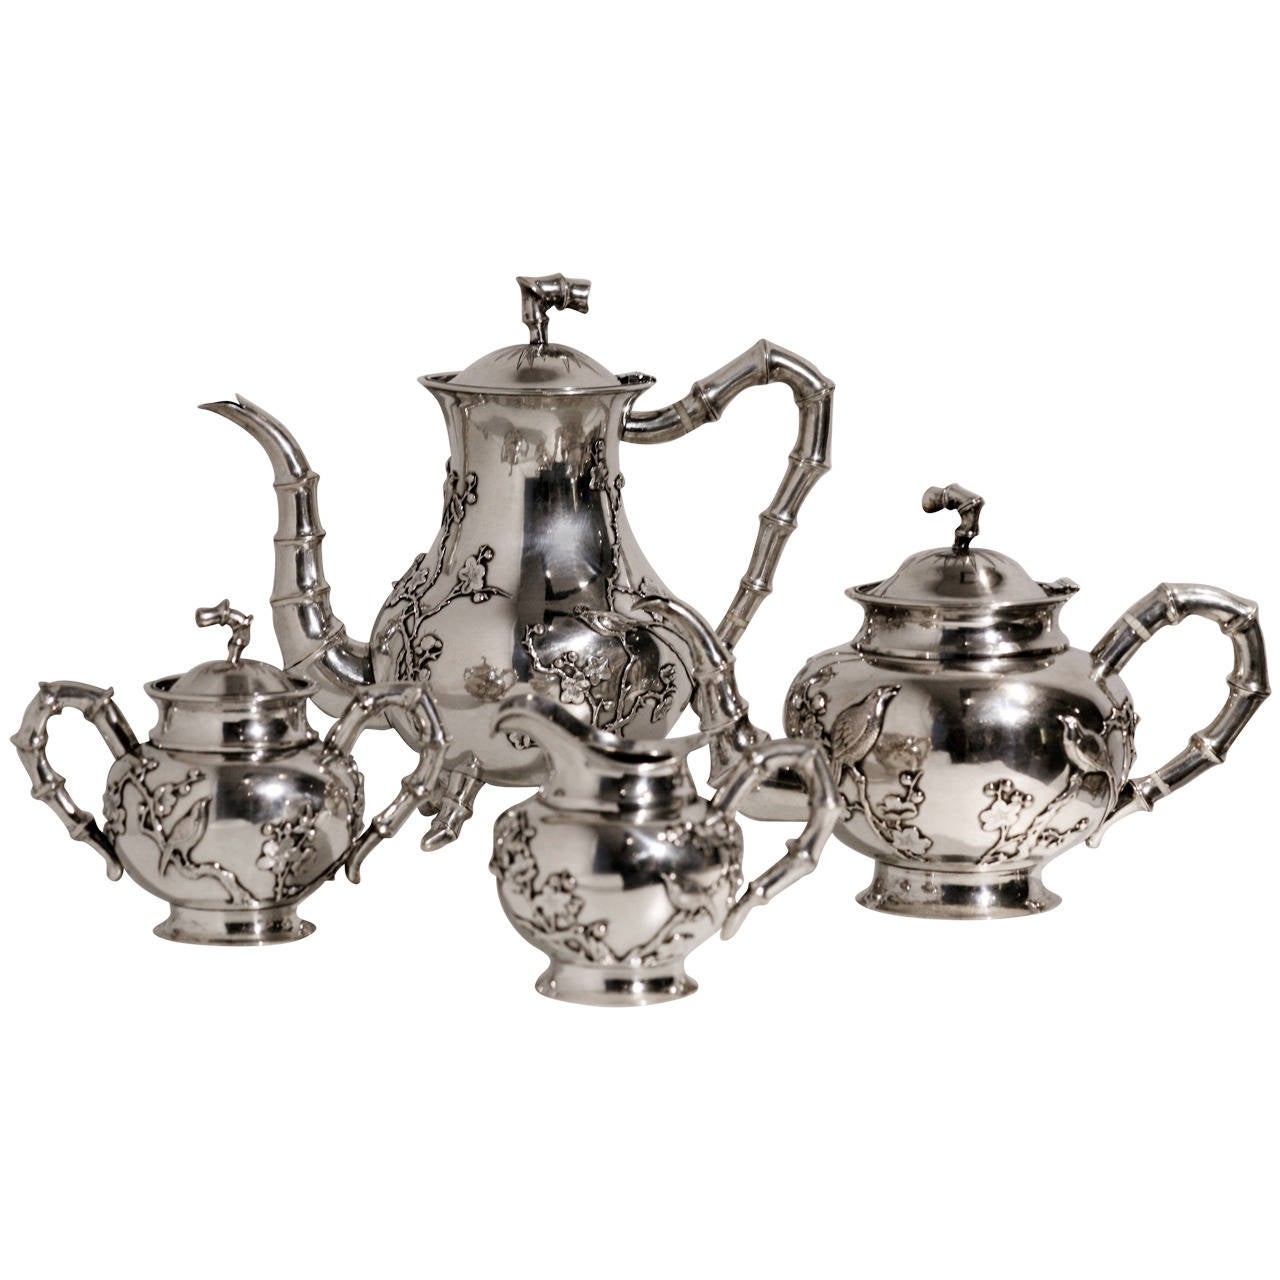 Japanese Art Nouveau Style Silver Tea and Coffee Set Floral Decorated with Birds For Sale